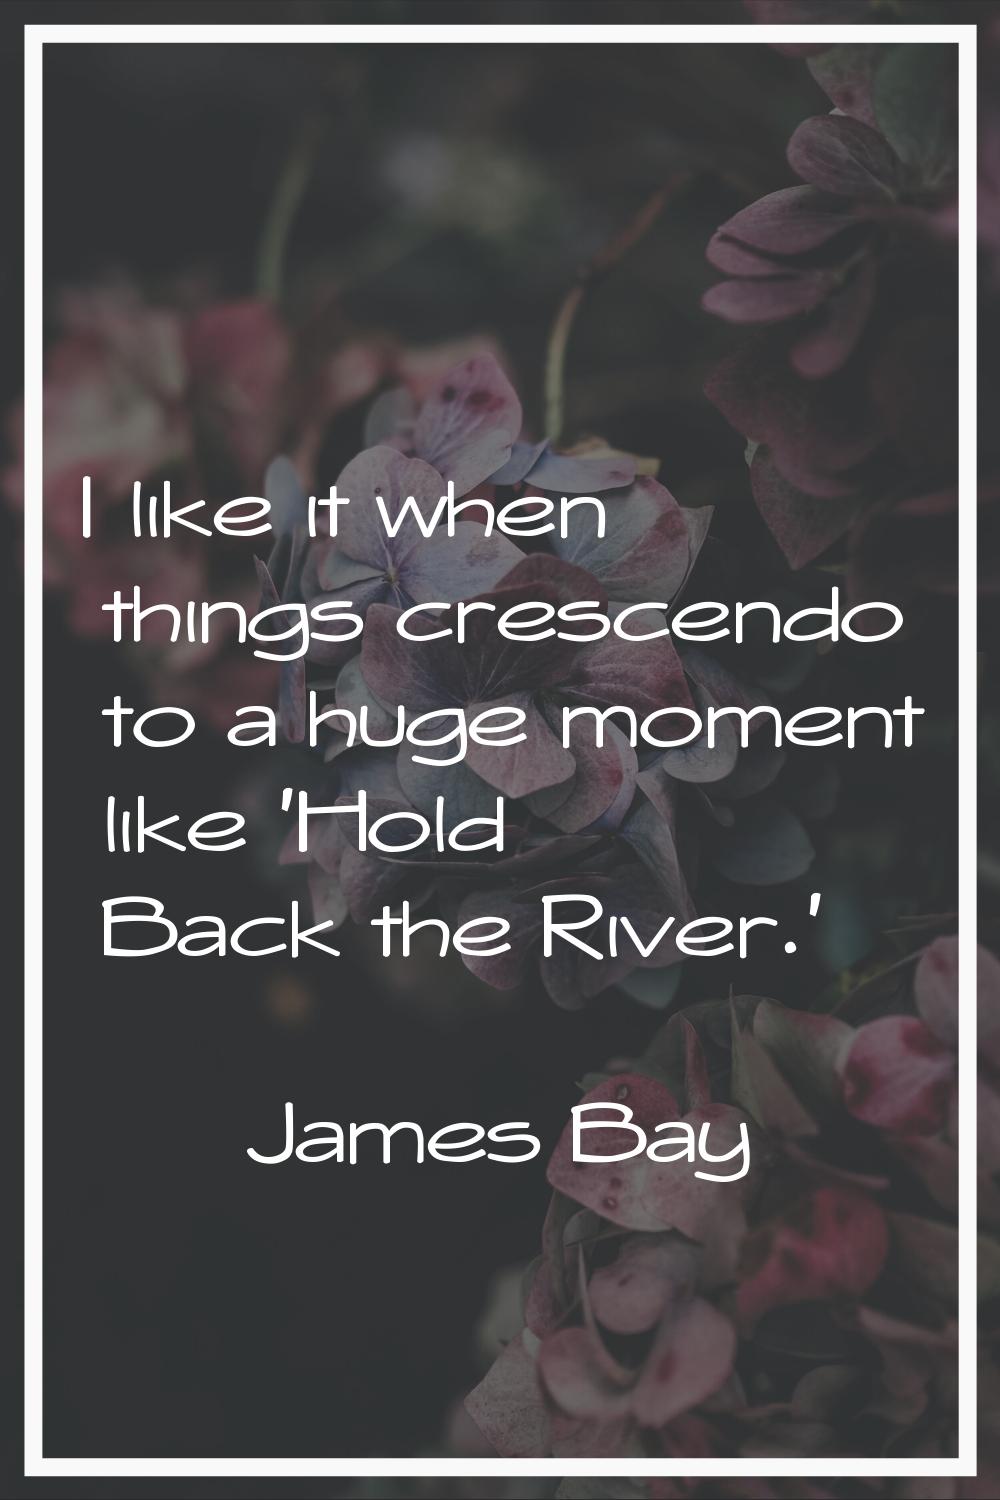 I like it when things crescendo to a huge moment like 'Hold Back the River.'